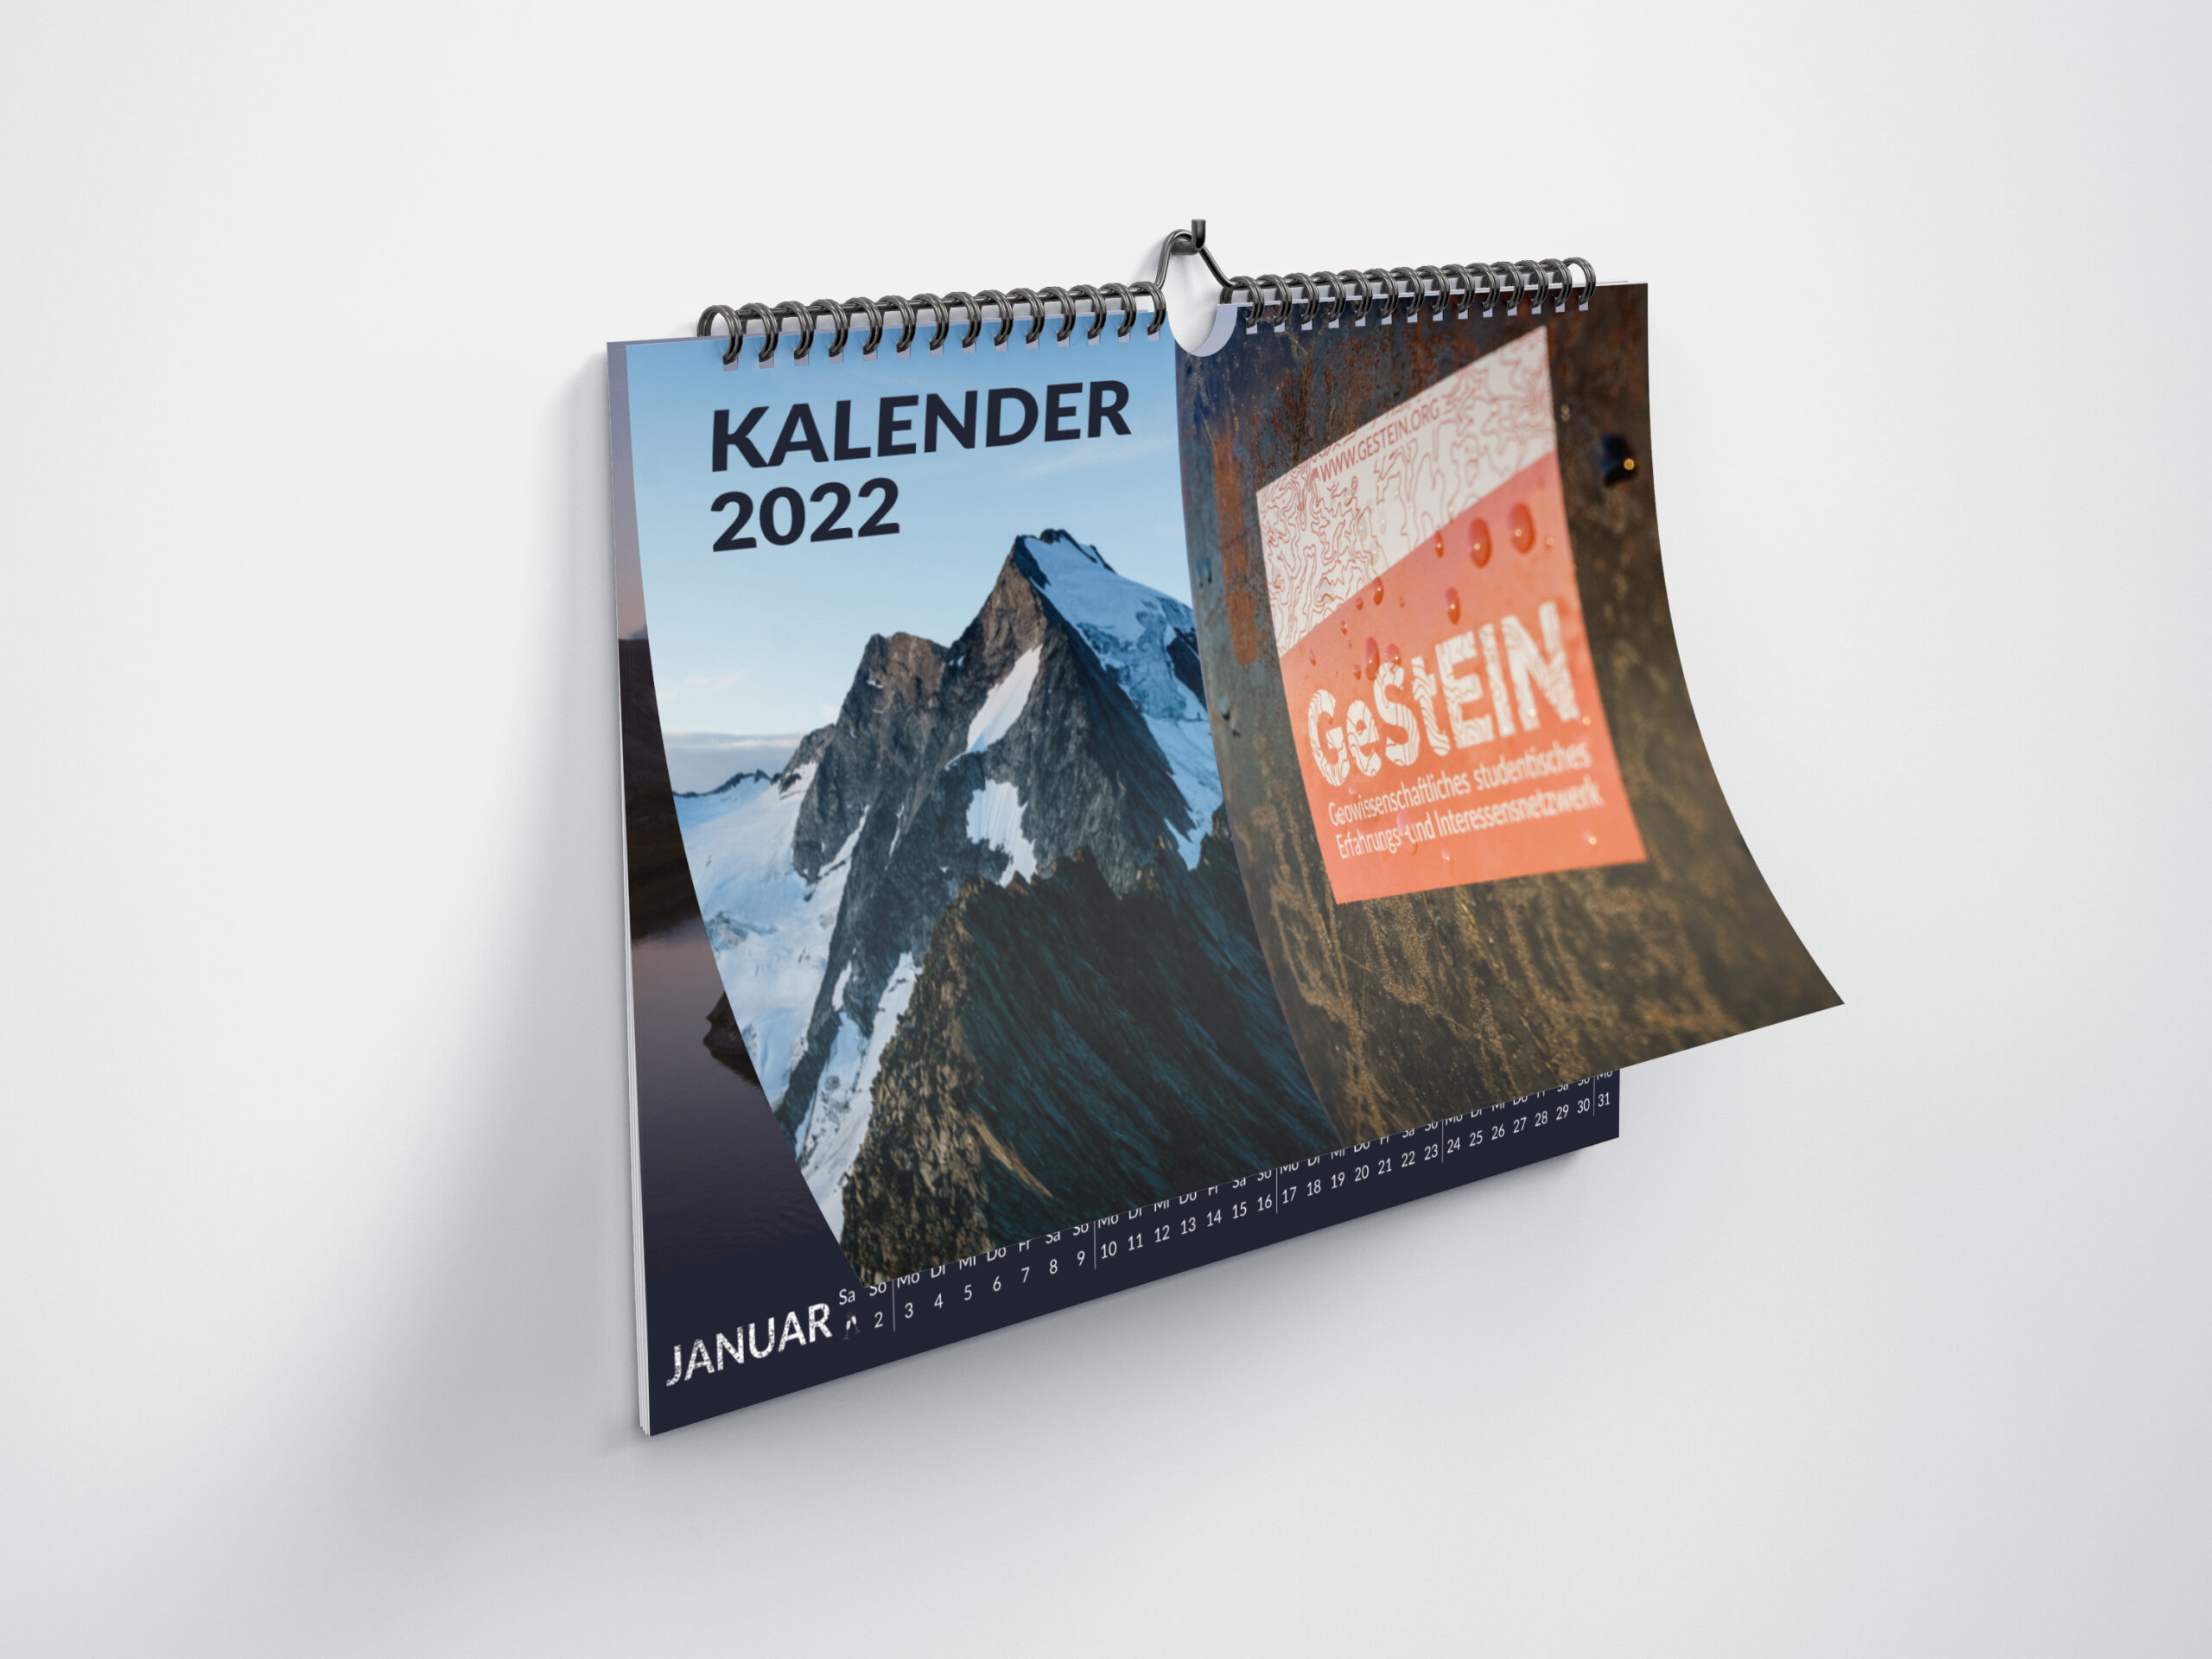 Kalender_2022_A4_Front-scaled